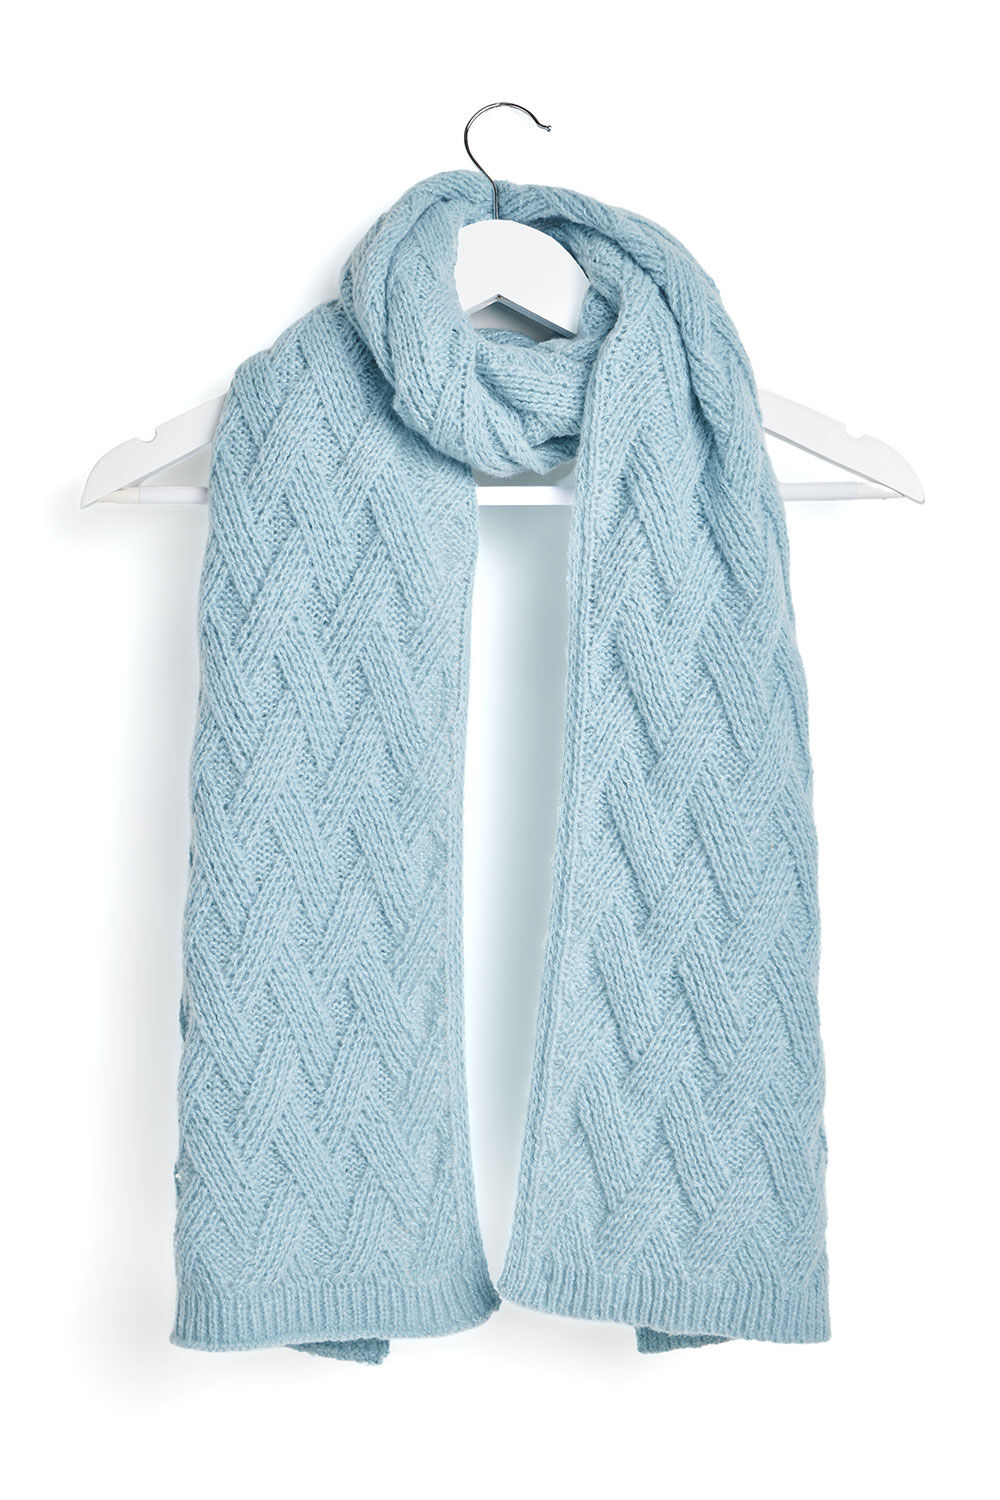 Bonmarche Teal Cross Over Cable Knit Scarf, Size: One Size